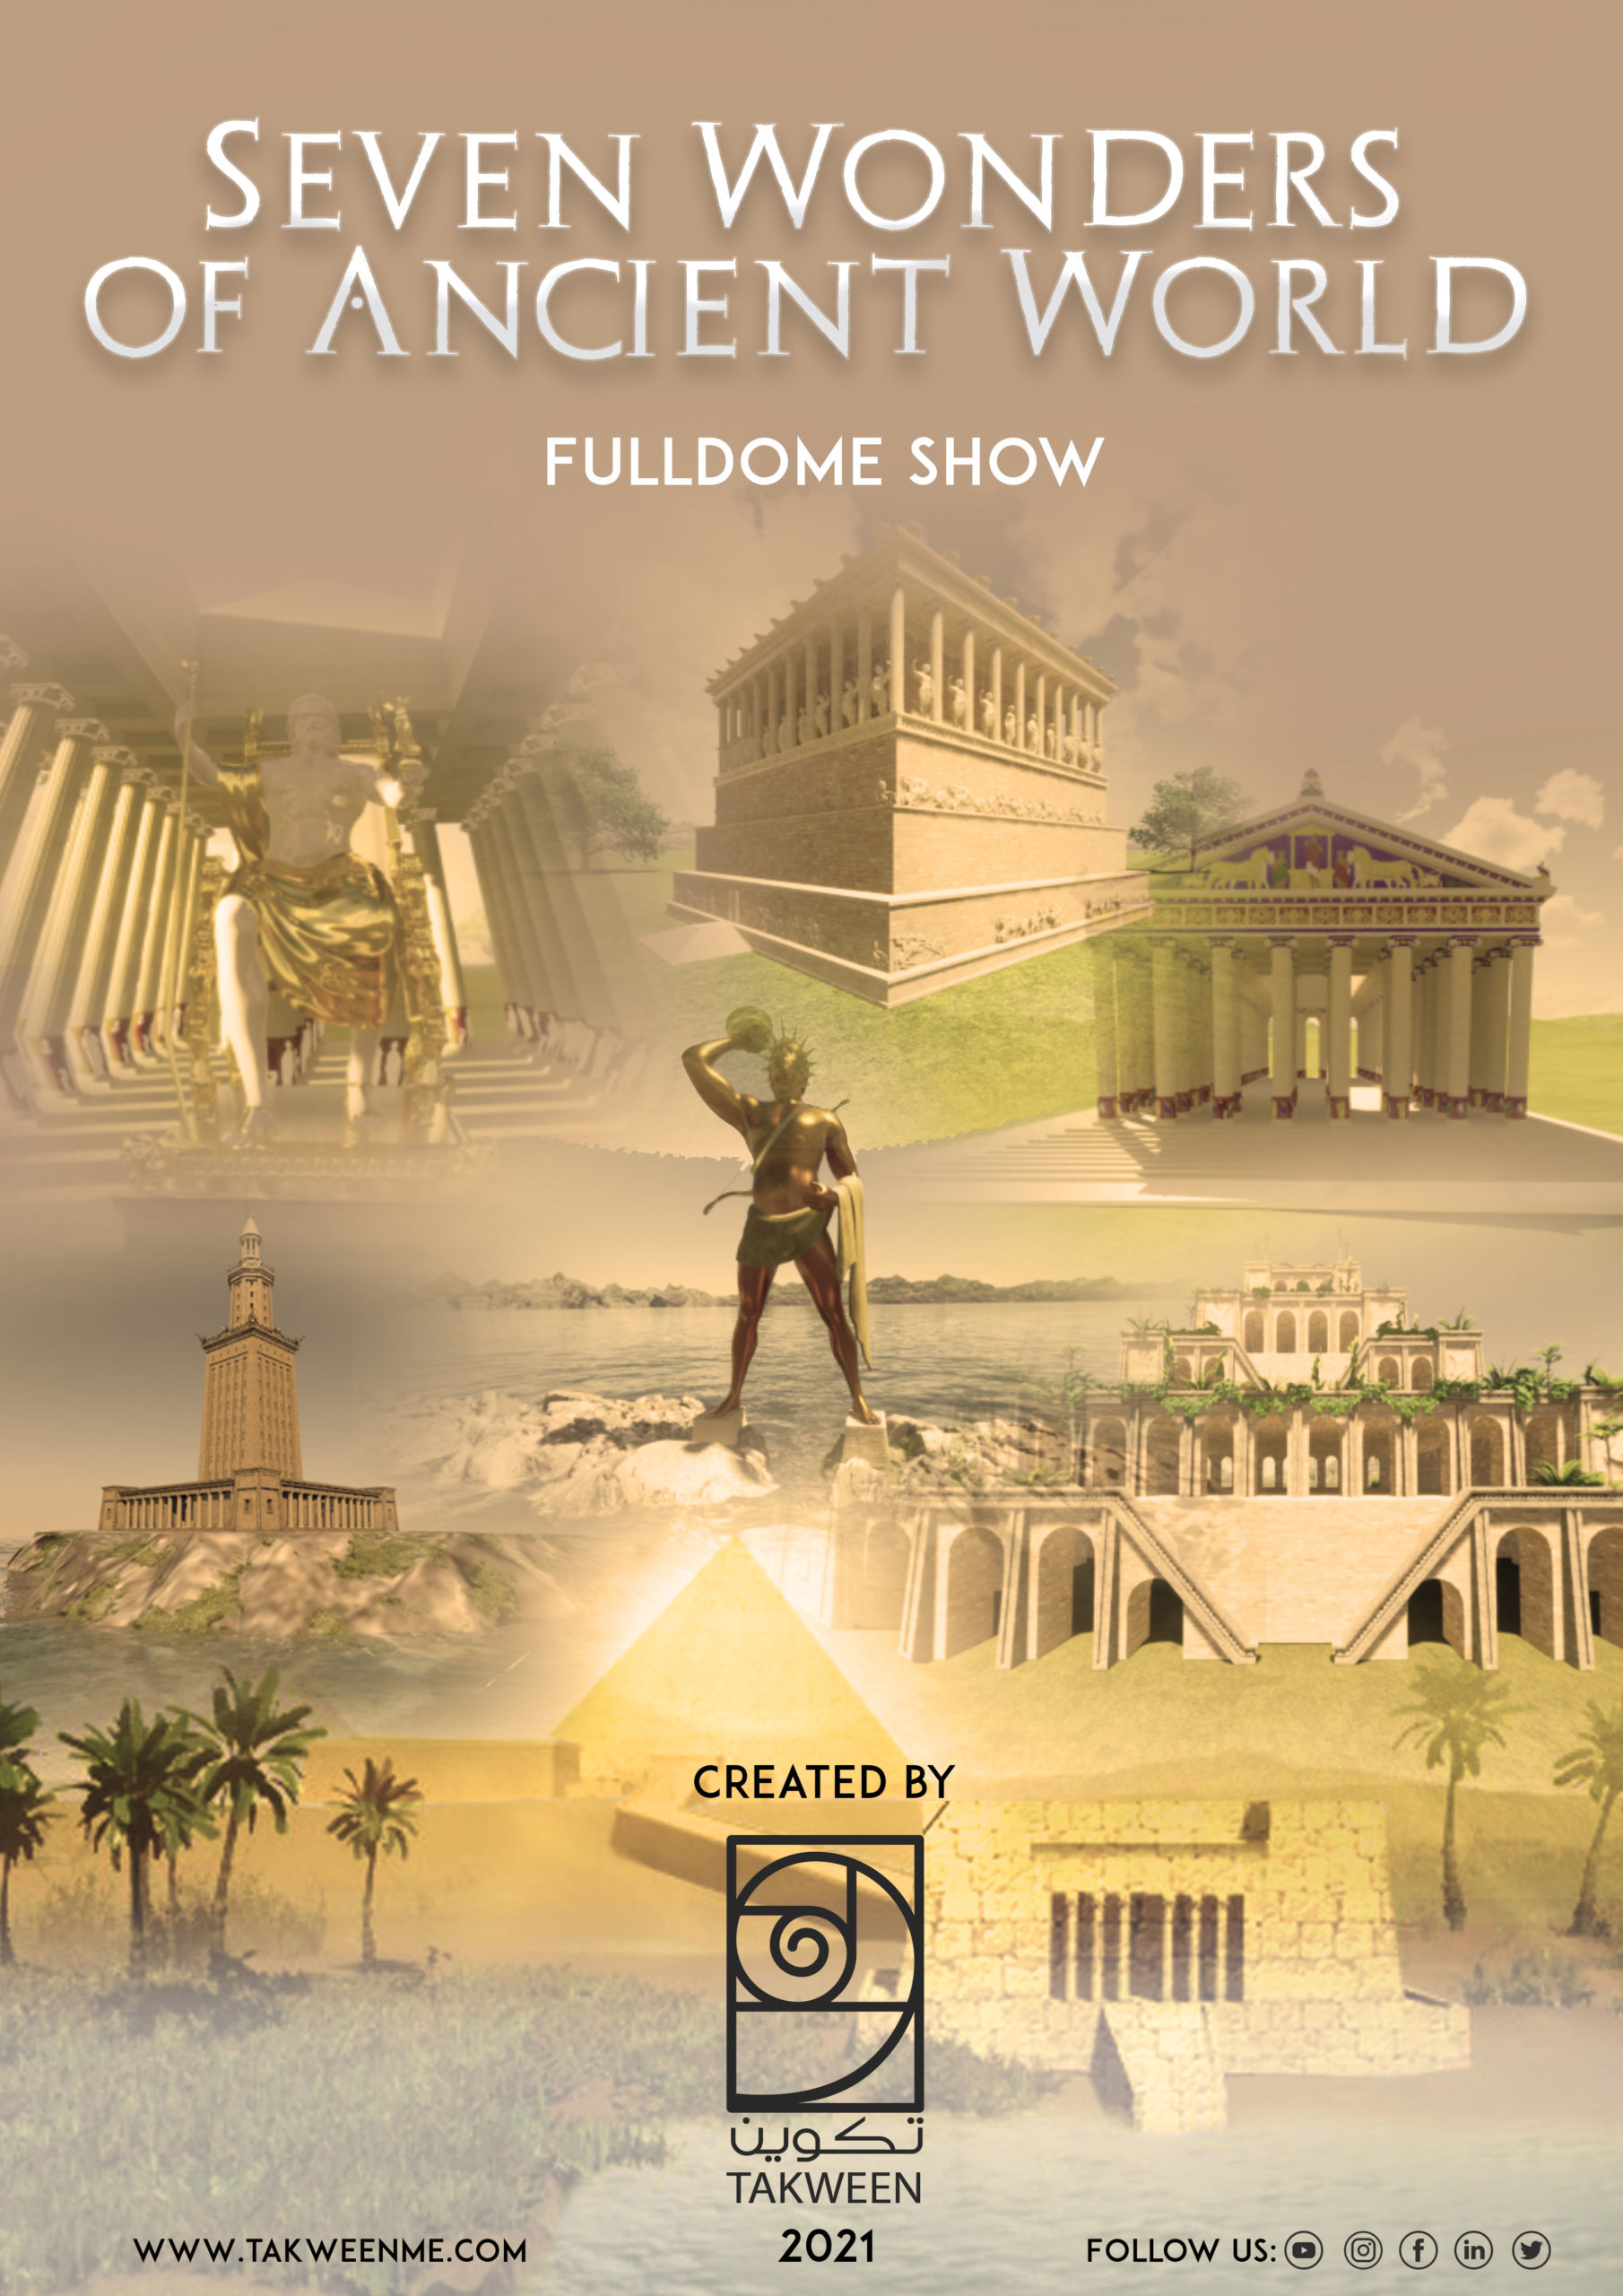 Img Poster Fulldome Show Seven Wonders Of Ancient World 655442b77c Scaled 